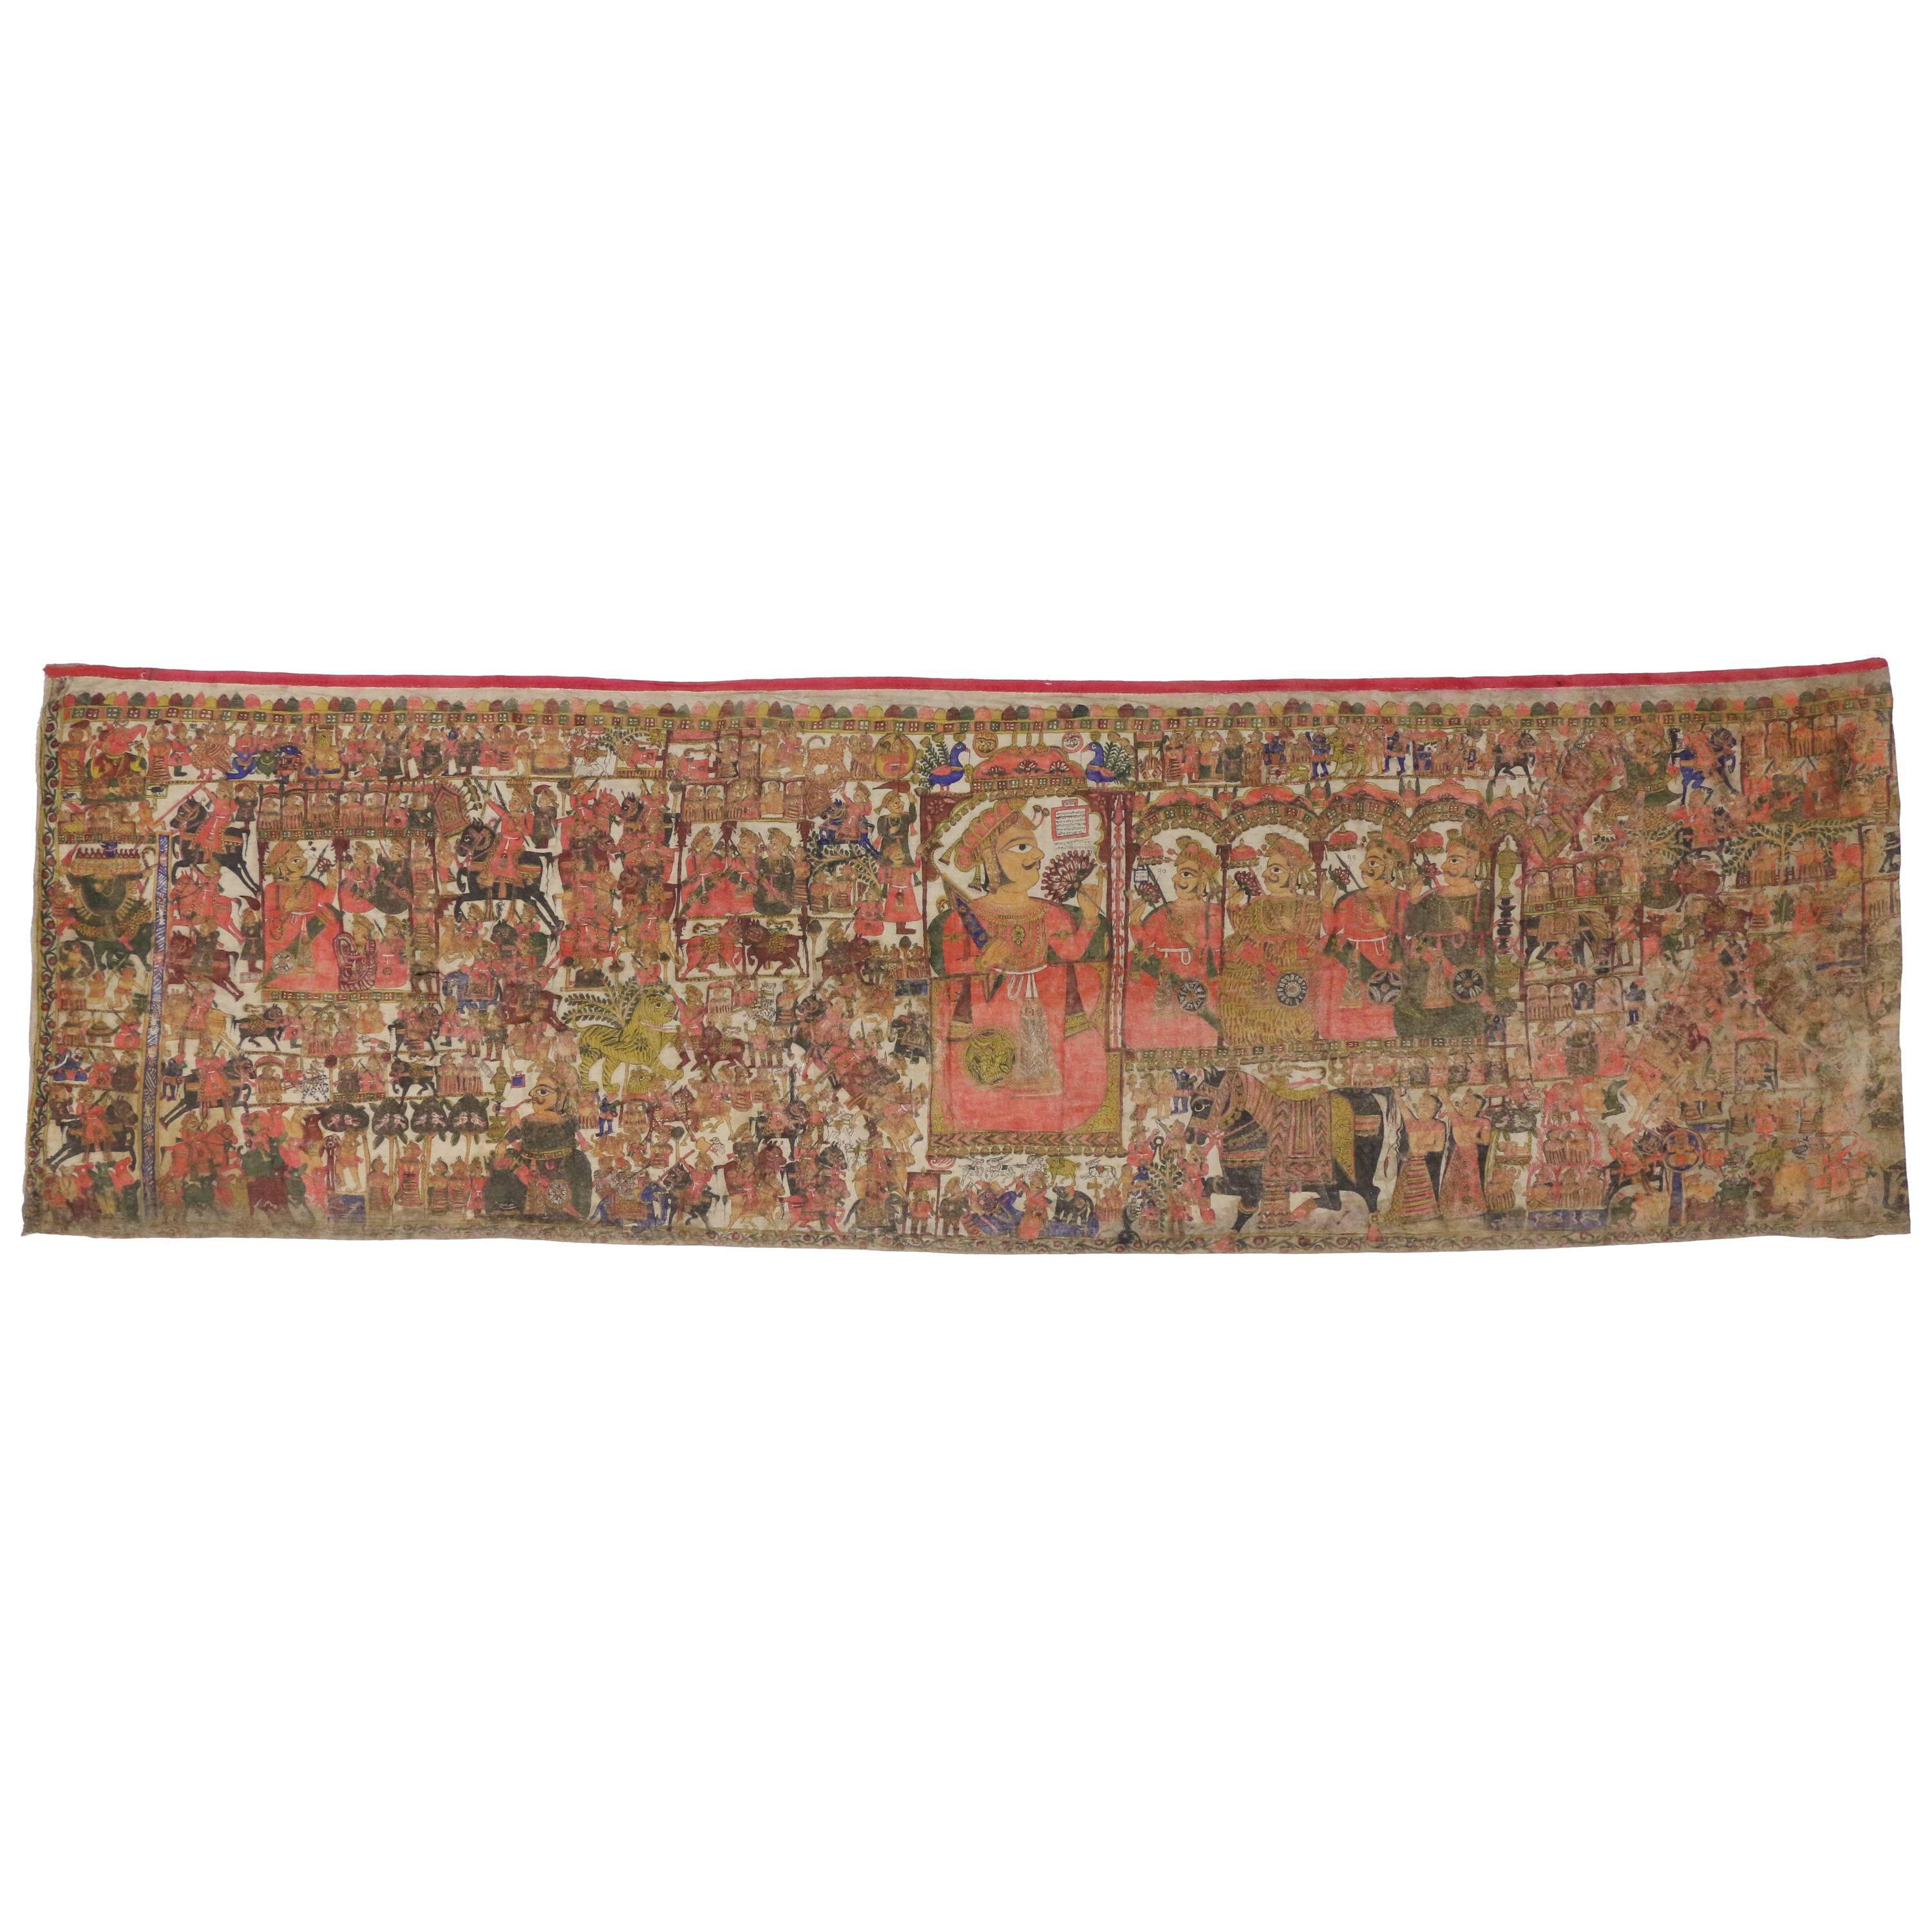 18th Century Antique Indian Medieval Tapestry after the Battle of Karnal in 1739